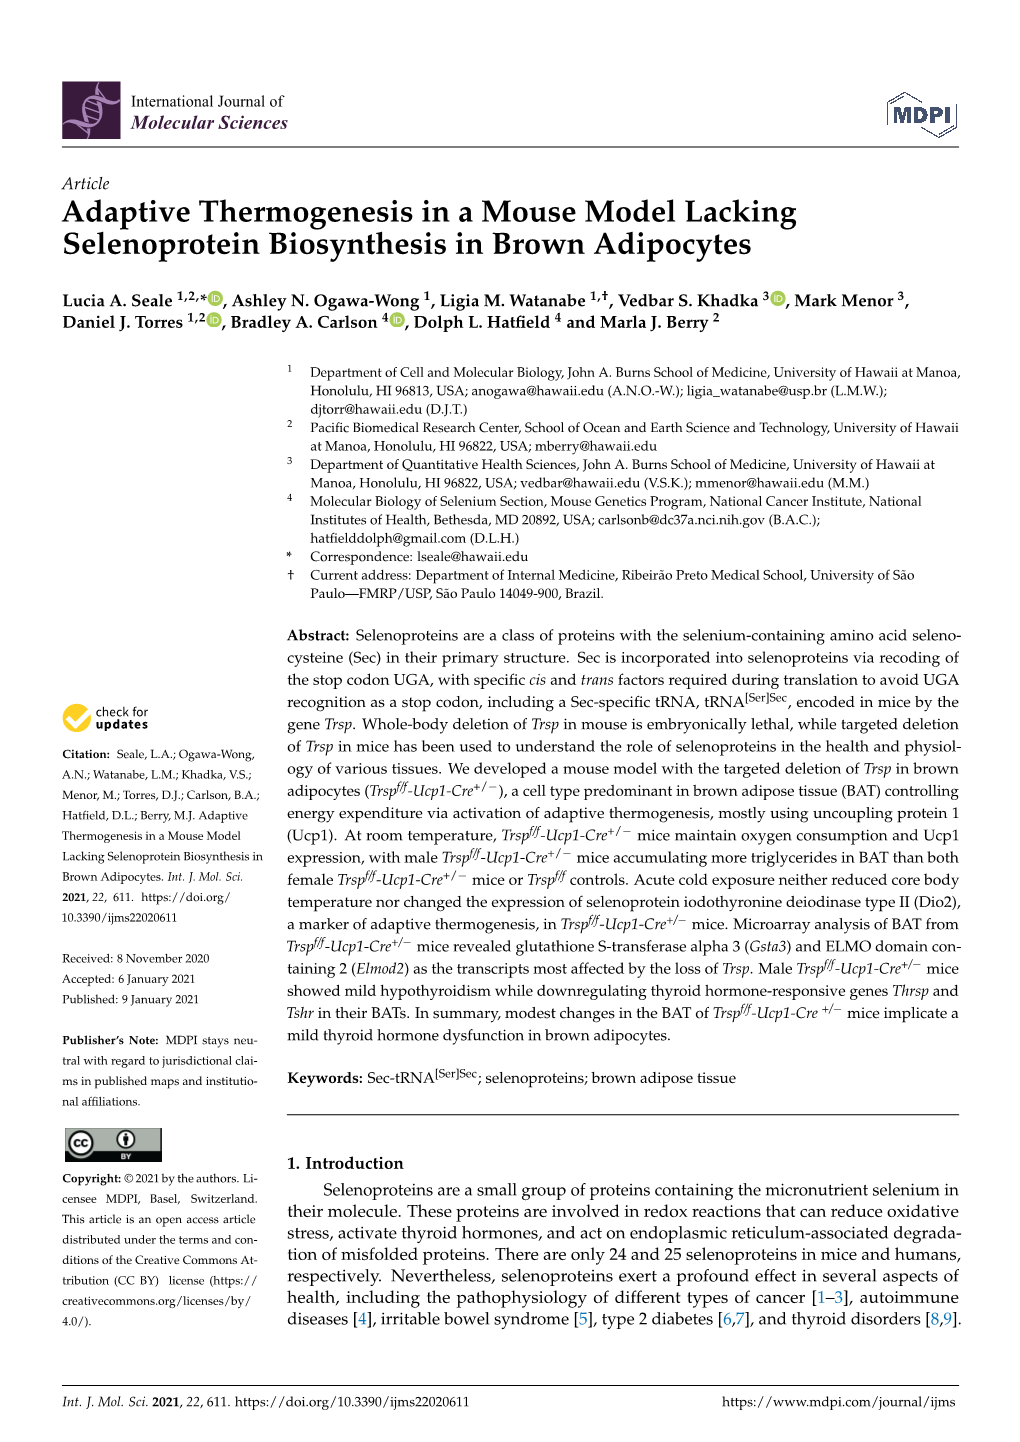 Adaptive Thermogenesis in a Mouse Model Lacking Selenoprotein Biosynthesis in Brown Adipocytes